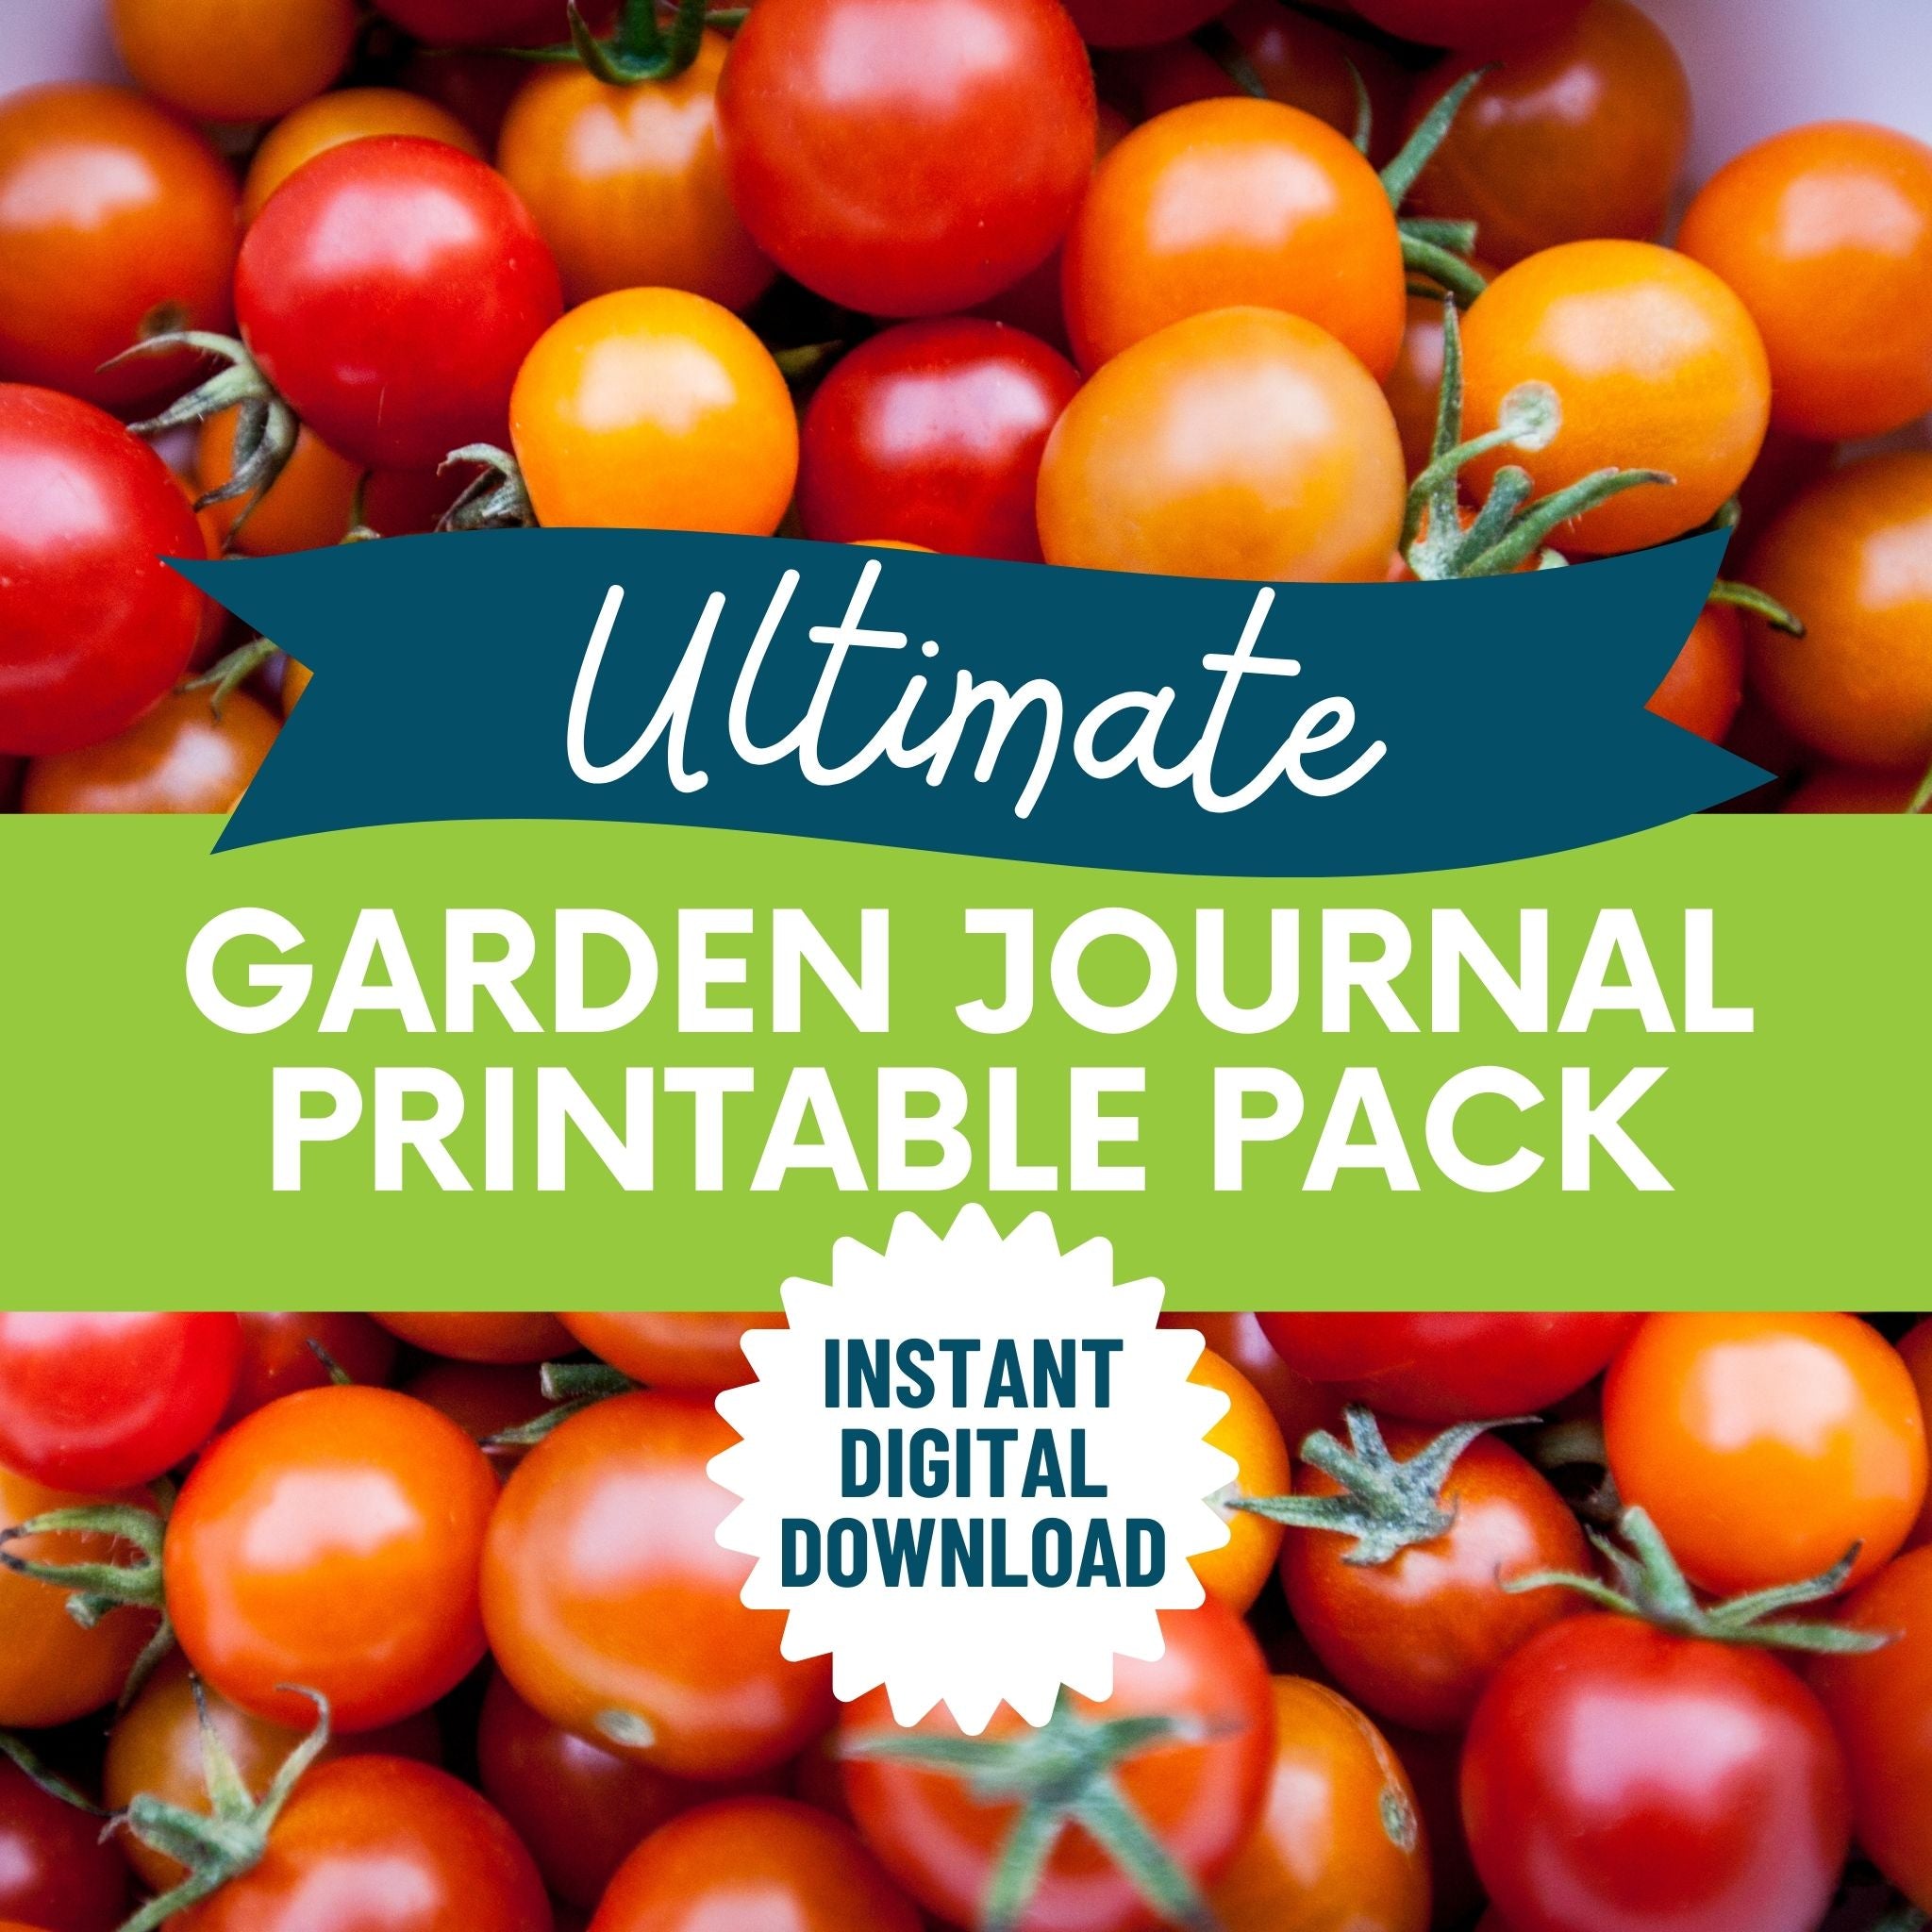 A pile of cherry tomatoes with the text "Ultimate Garden Journal Printable Pack: Instant Digital Download" over the top